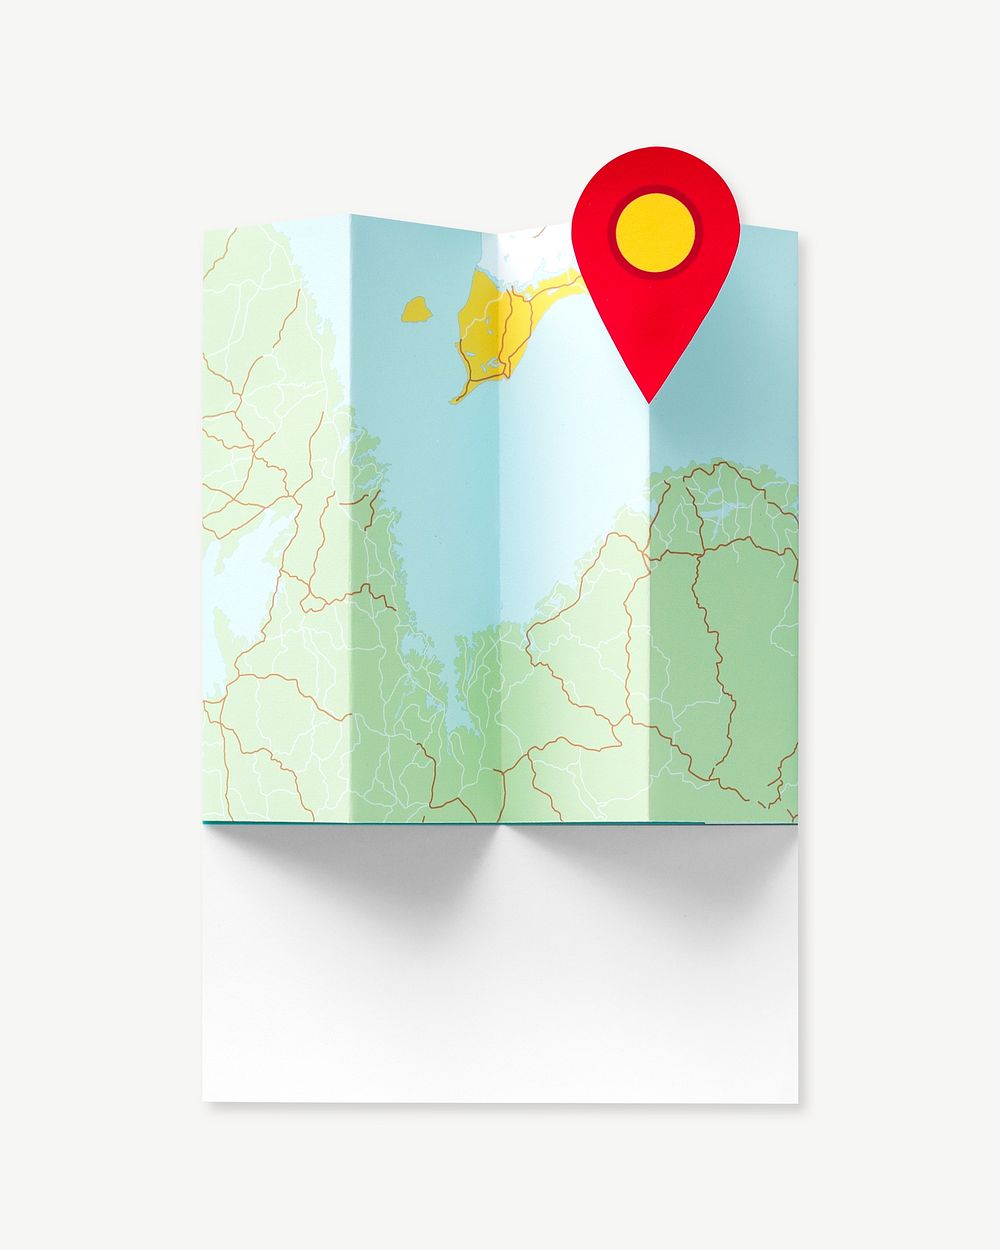 Paper craft art of a map collage element psd